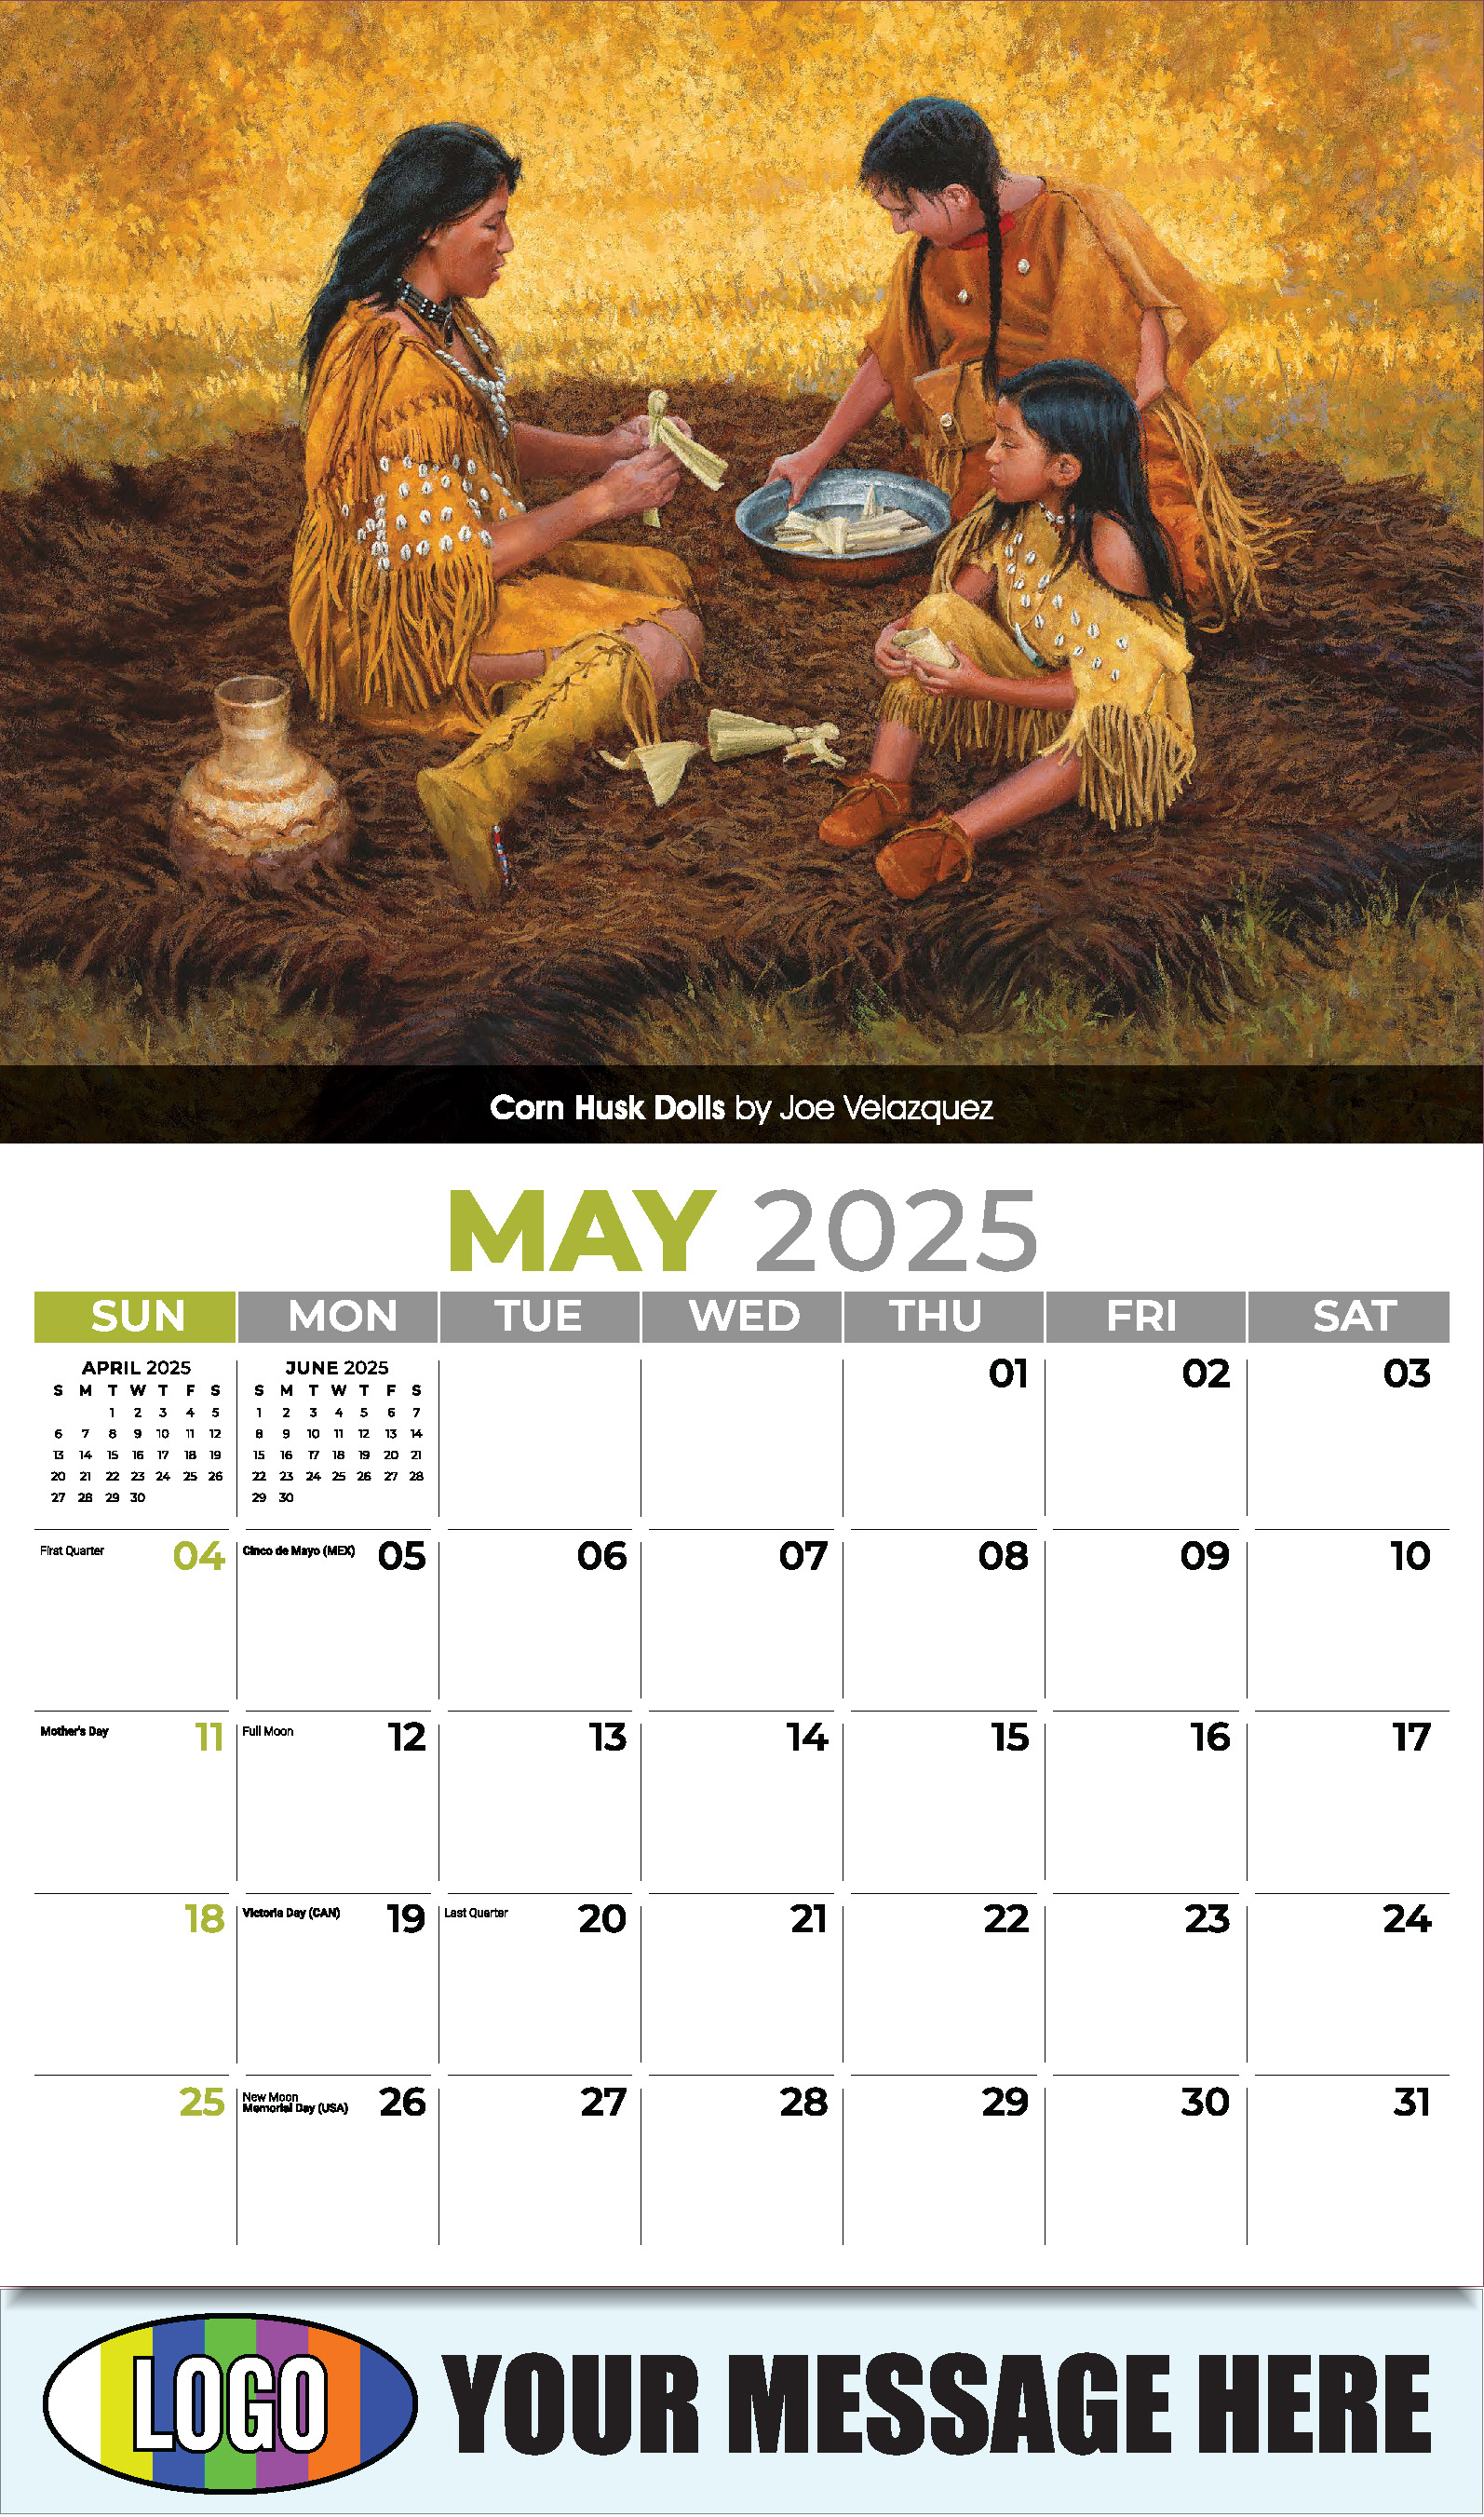 Spirit of the Old West 2025 Old West Art Business Promo Wall Calendar - May